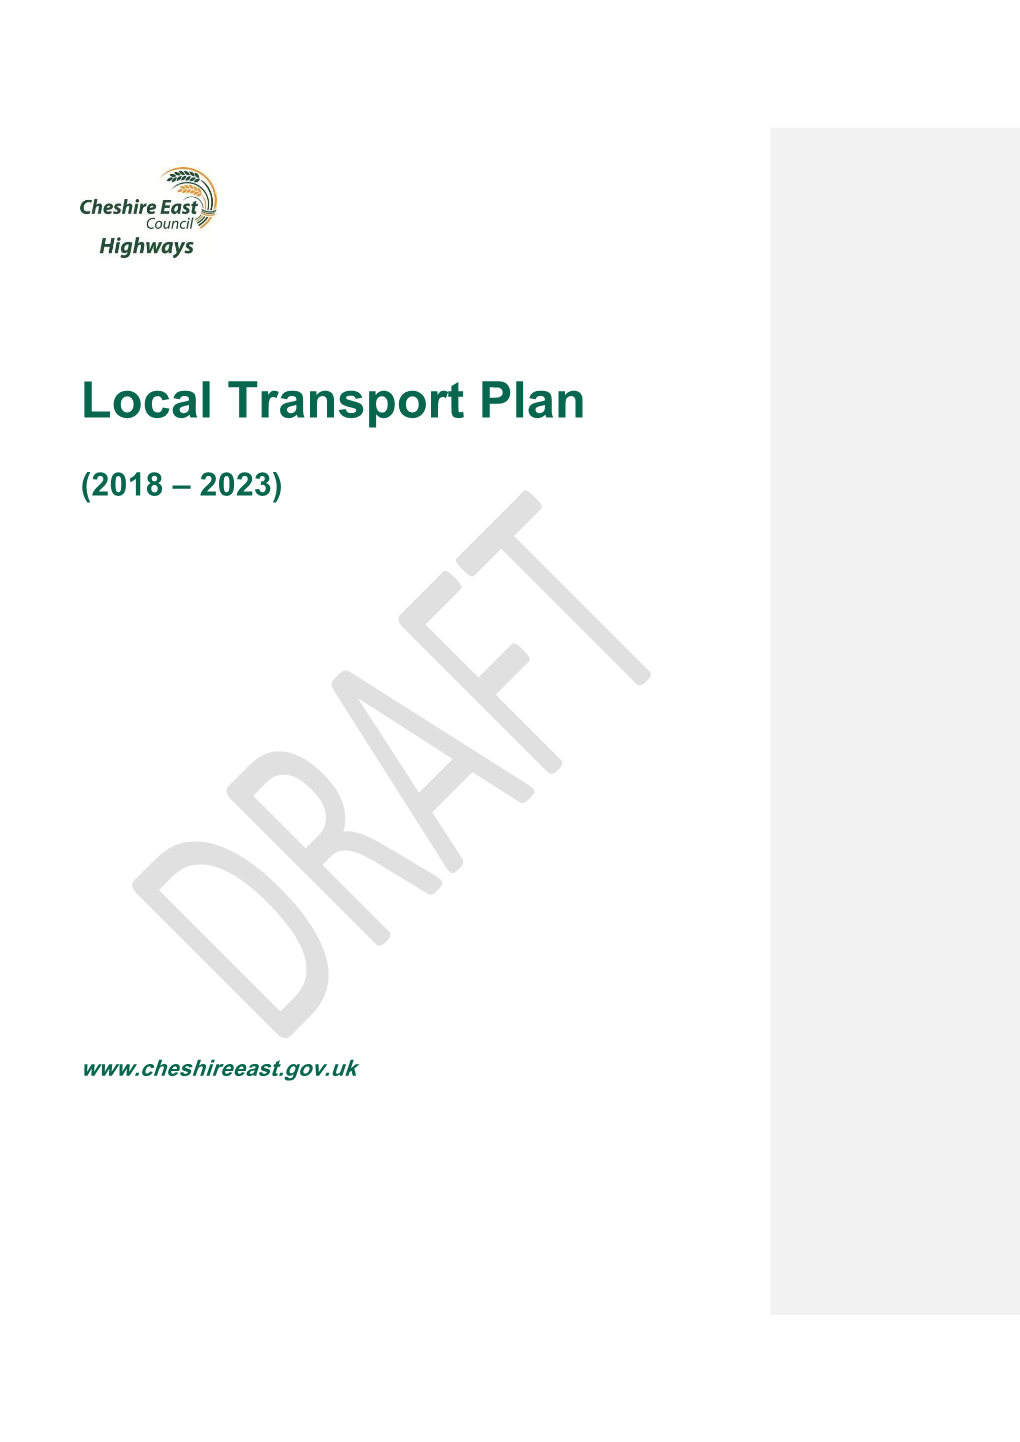 Cheshire East LTP Refresh Client: Cheshire East Council Project No: B1832116 Document Title: Version 1 Ref